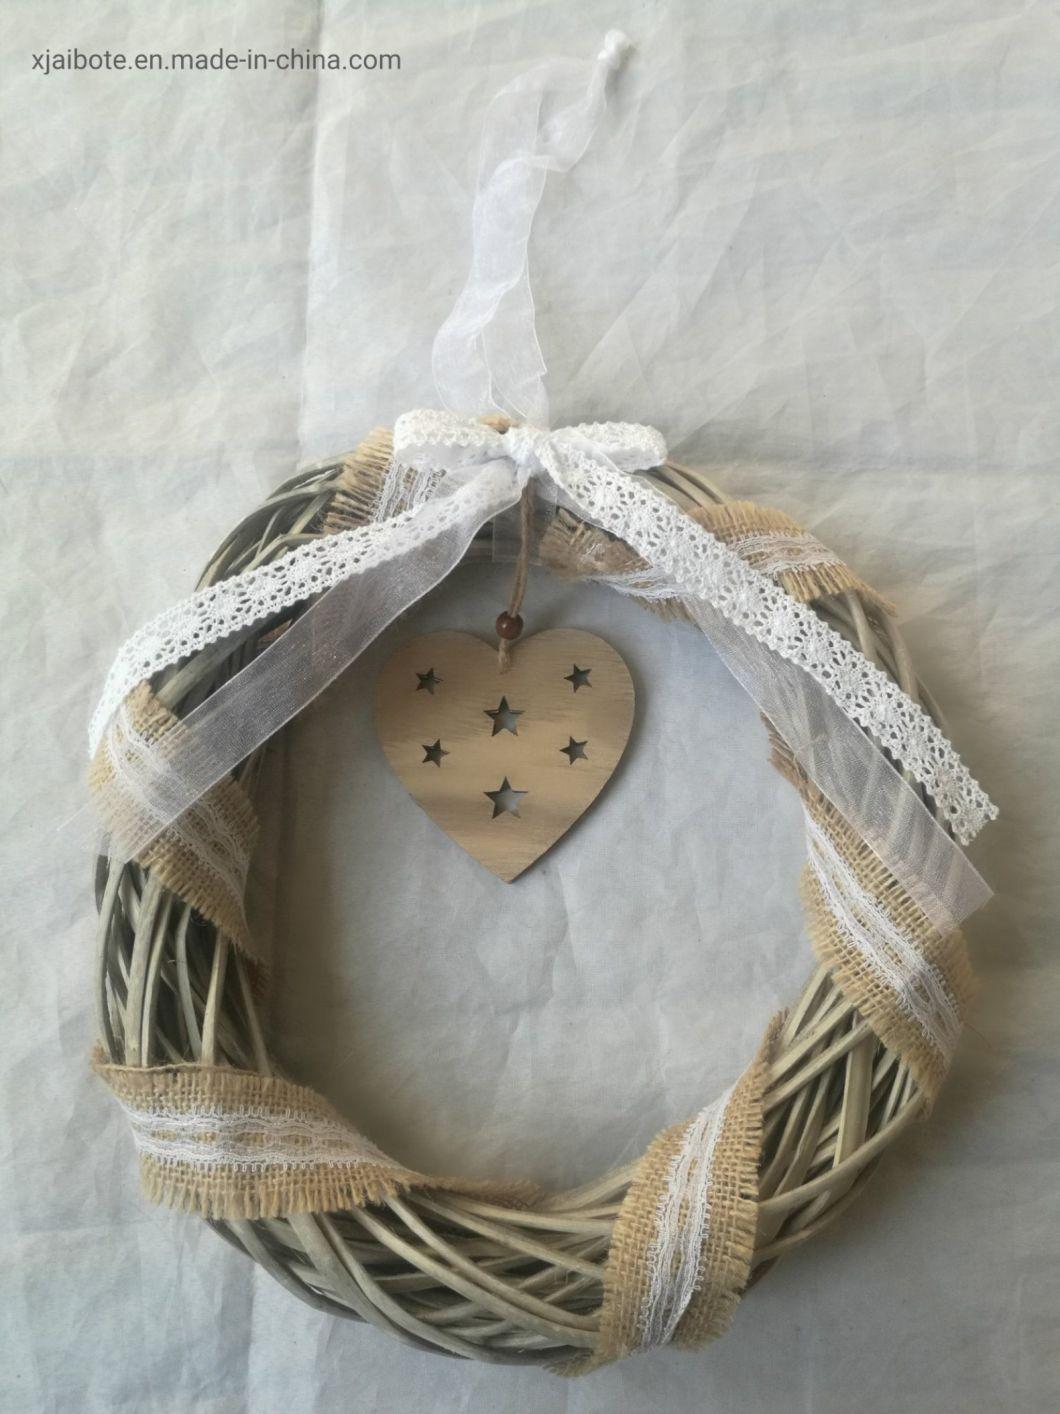 Customized Heart-Shaped Wicker Home Ornaments